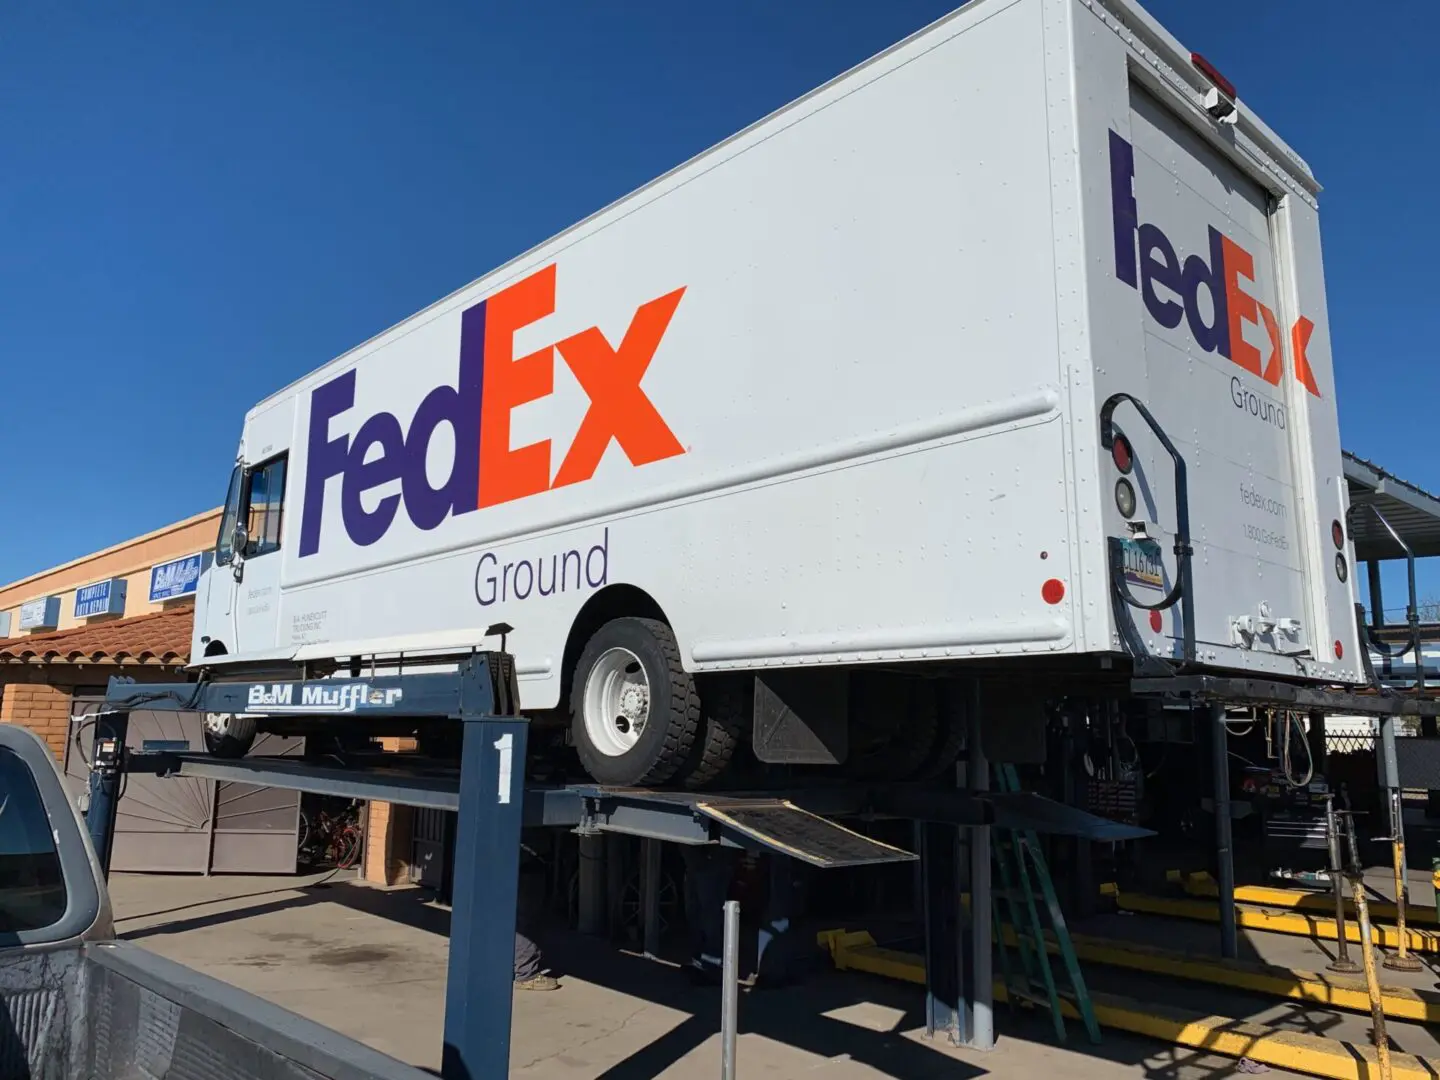 A fedex truck parked on the side of a road.